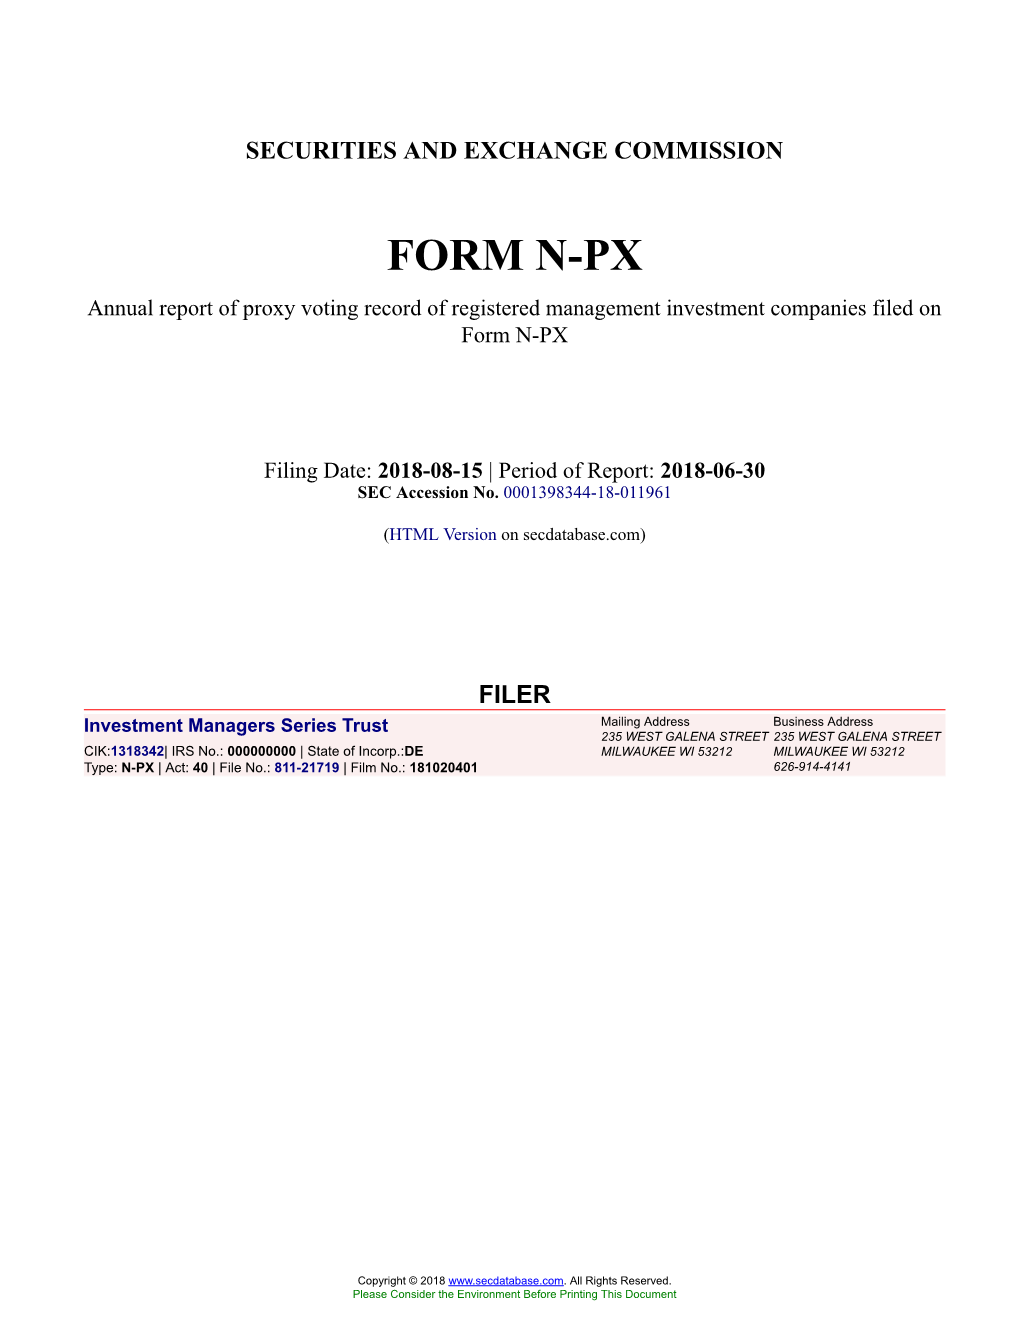 Investment Managers Series Trust Form N-PX Filed 2018-08-15